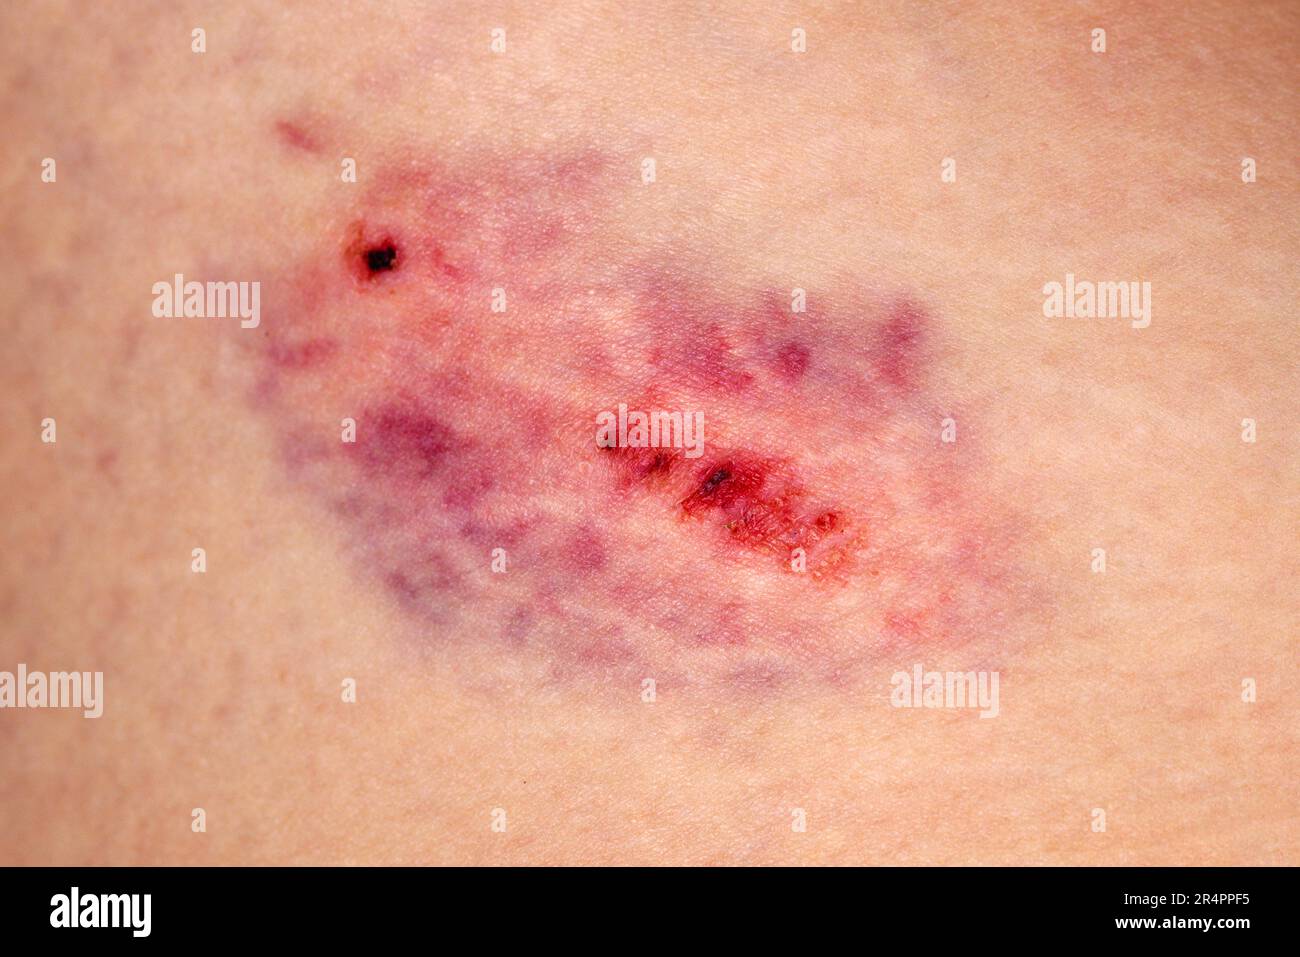 Closeup Bruise On Wounded Woman Leg Skin Domestic Violence Stock Photo